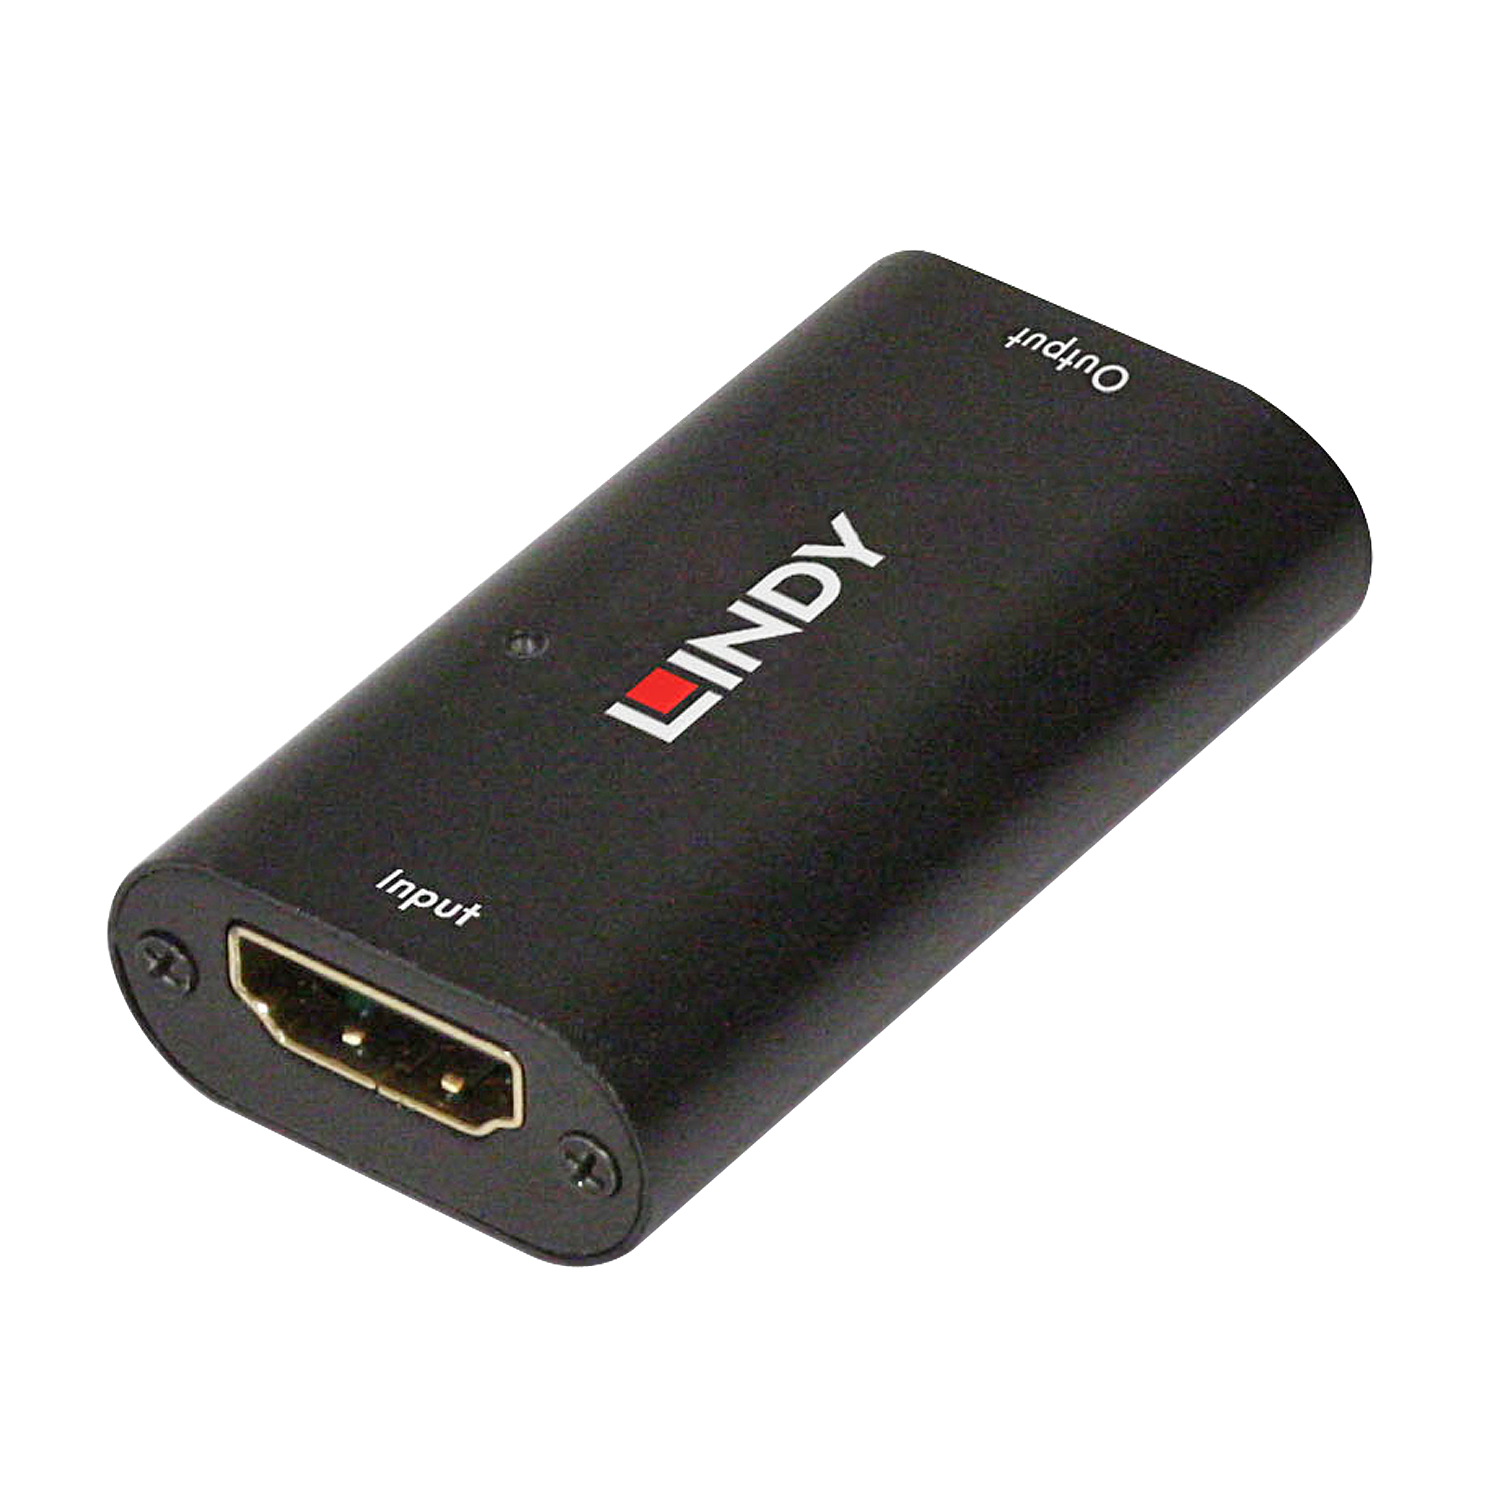 LINDY HDMI 2.0 18G UHD/HDR Repeater/Extender (38211)